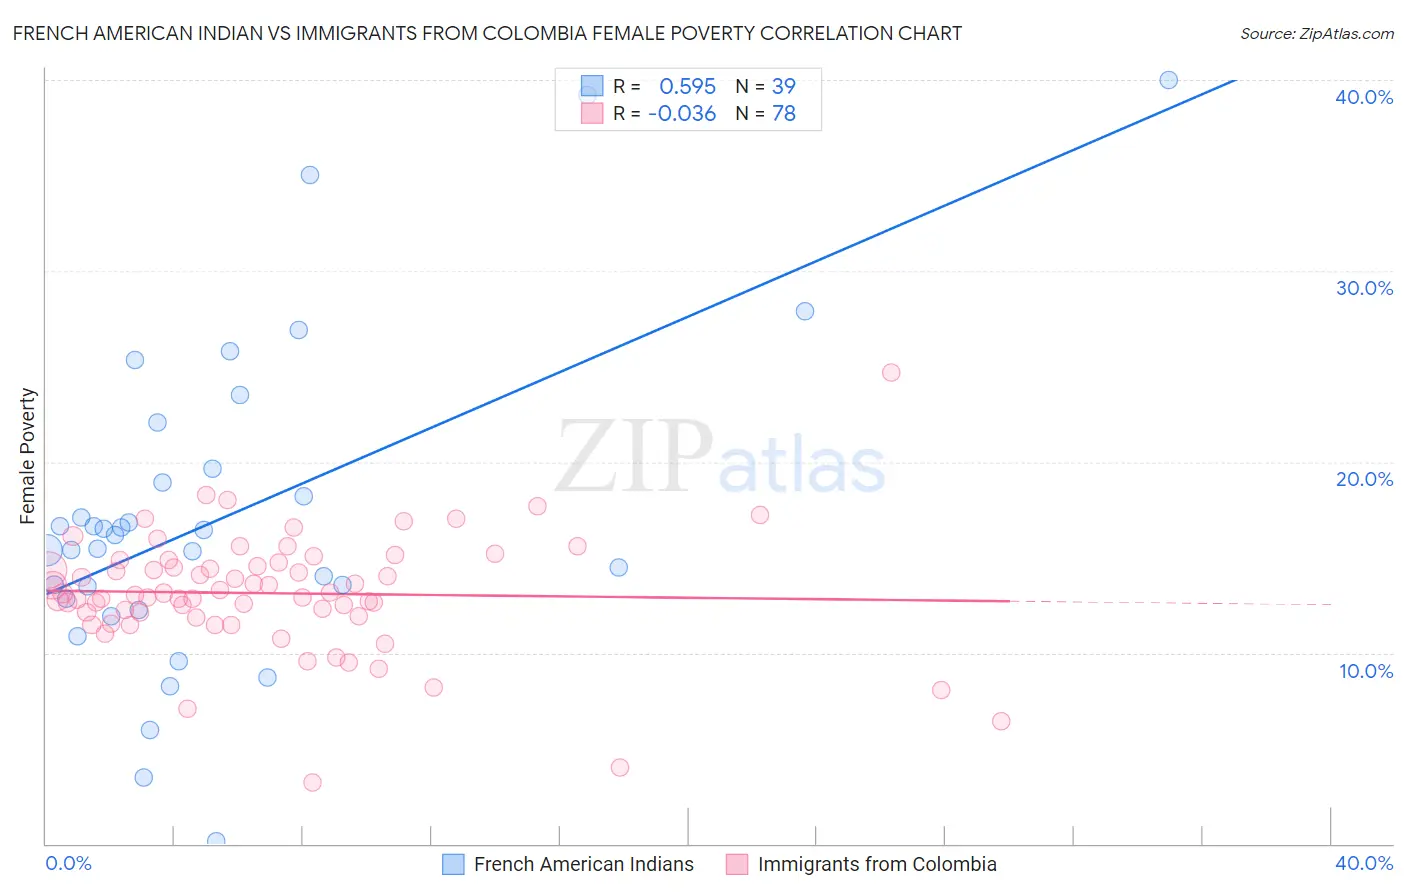 French American Indian vs Immigrants from Colombia Female Poverty